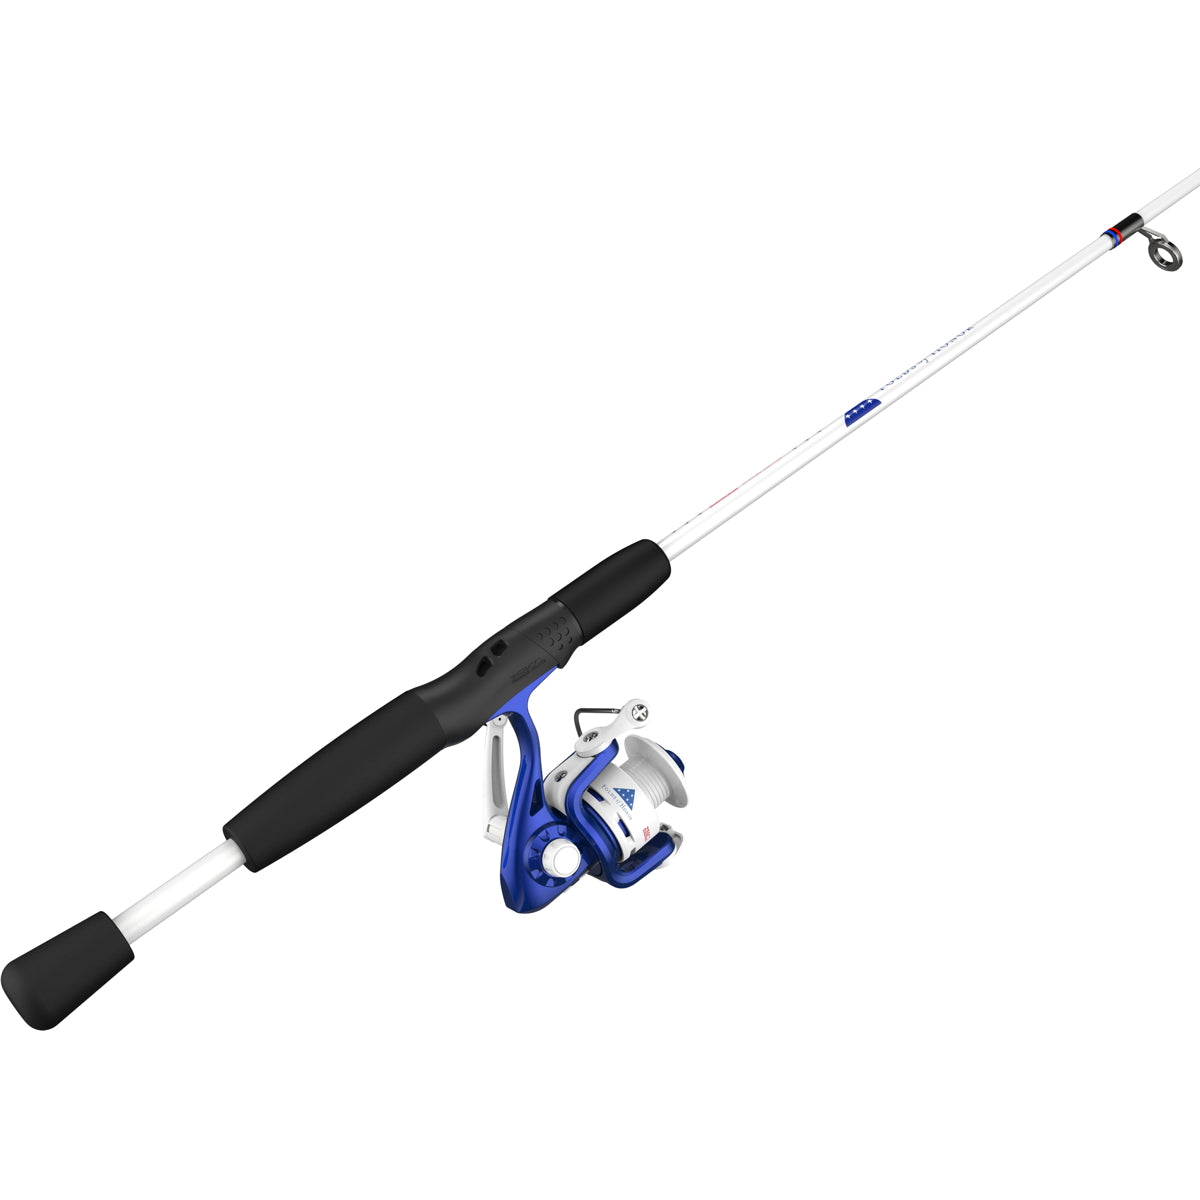 Photo of Zebco Folds of Honor 20SZ/602M Spinning Combo for sale at United Tackle Shops.